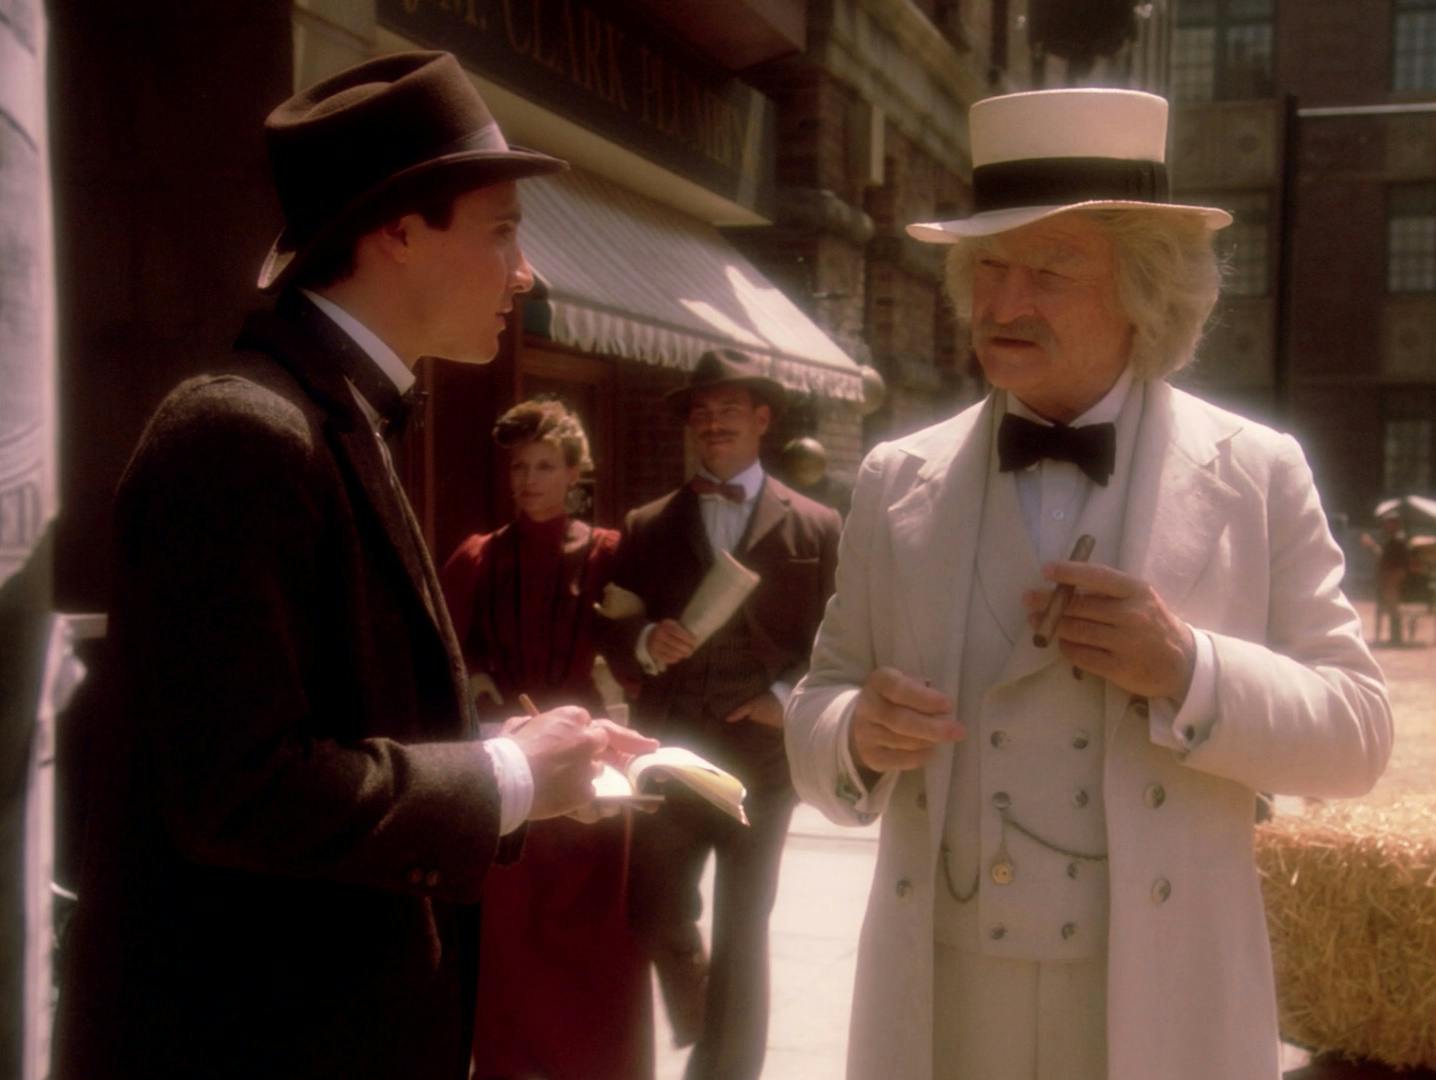 In 1893, Samuel Clemens aka Mark Twain is walking down a street in San Francisco, California with a young reporter in tow writing down much of what he's saying on a notepad while he discusses time travel in 'Time's Arrow, Part II'